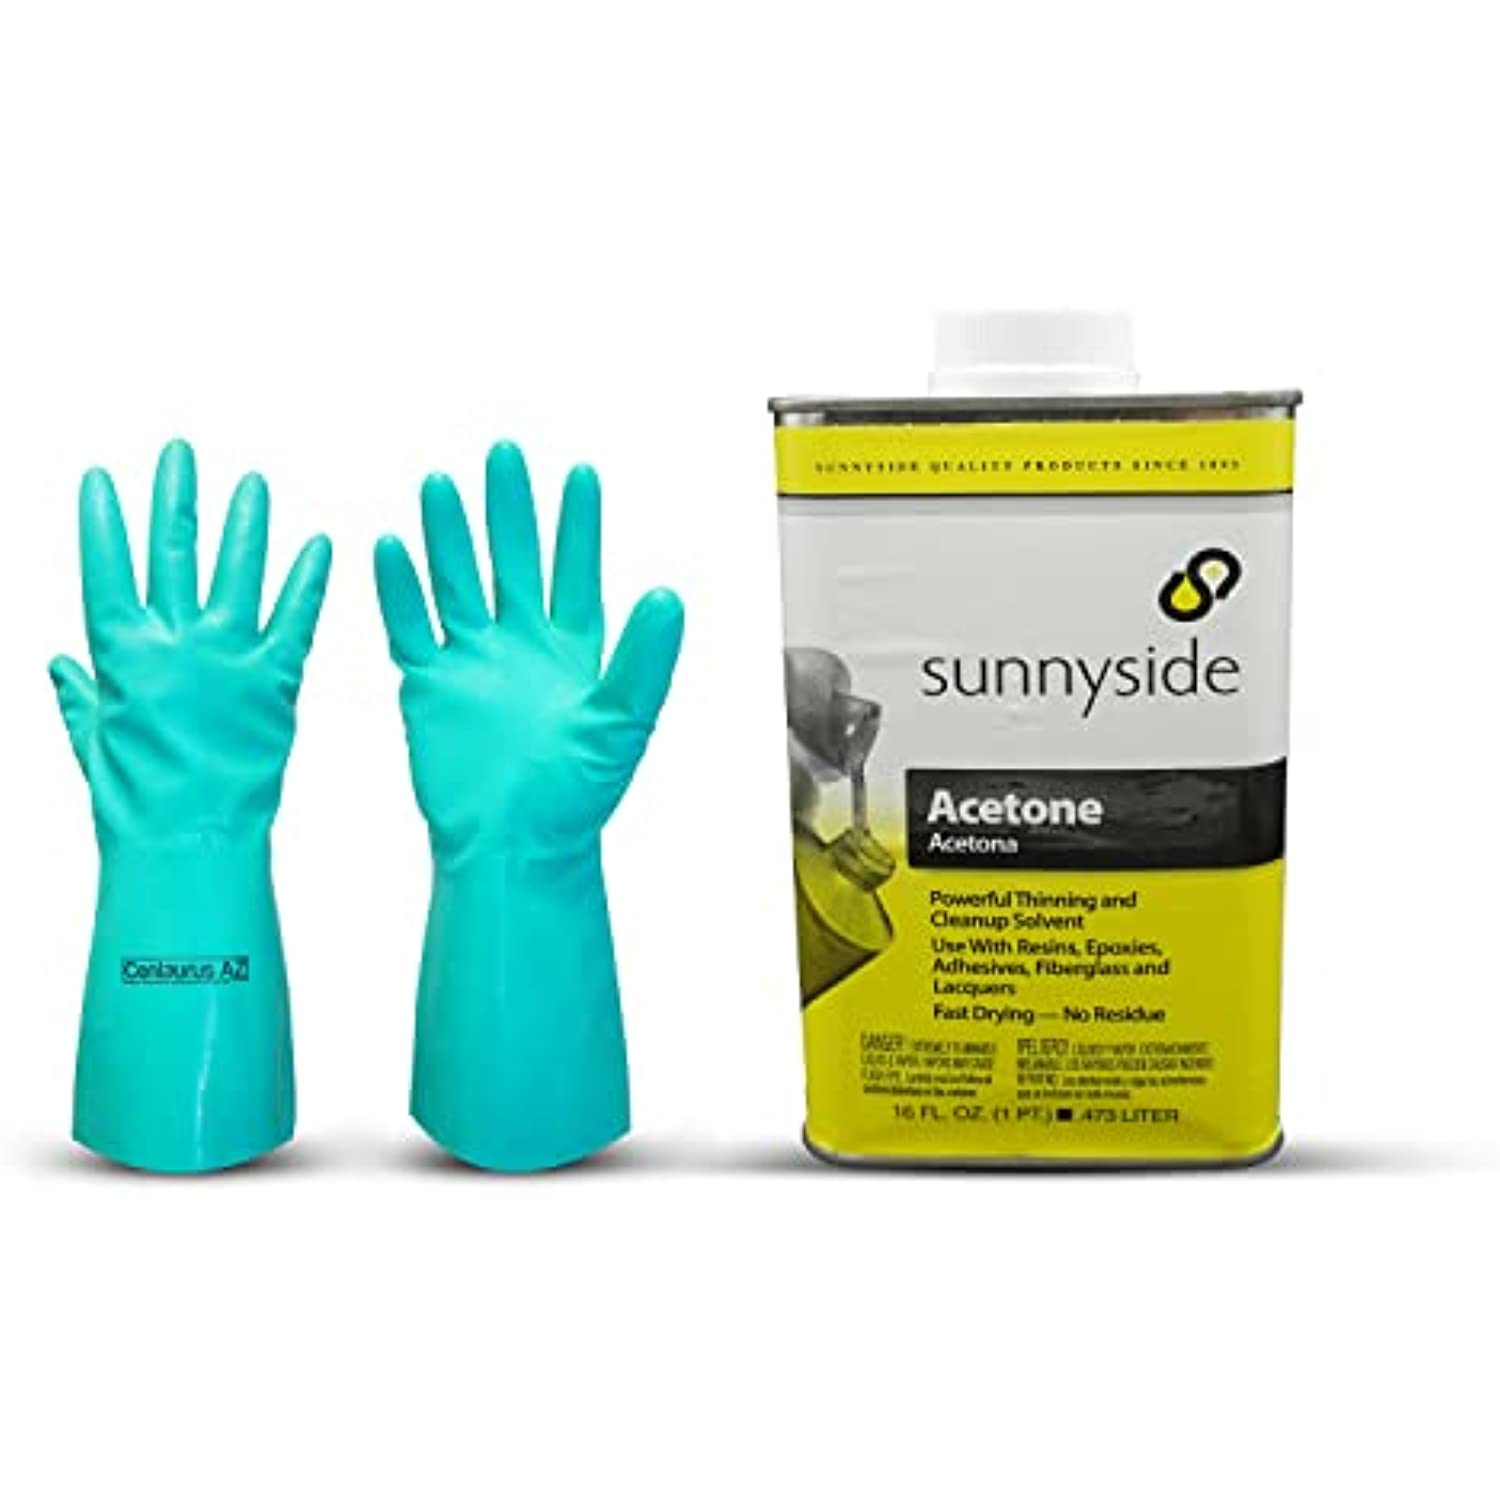 Sunnyside 1-Pint Acetone with Centaurus AZ Resistant Glove for Cosmetics Textiles Automotive Colorless Cleanup Dried Latex Epoxy Fiberglass Resins Ink Rust Adhesives Lacquers Fast Drying No Residue